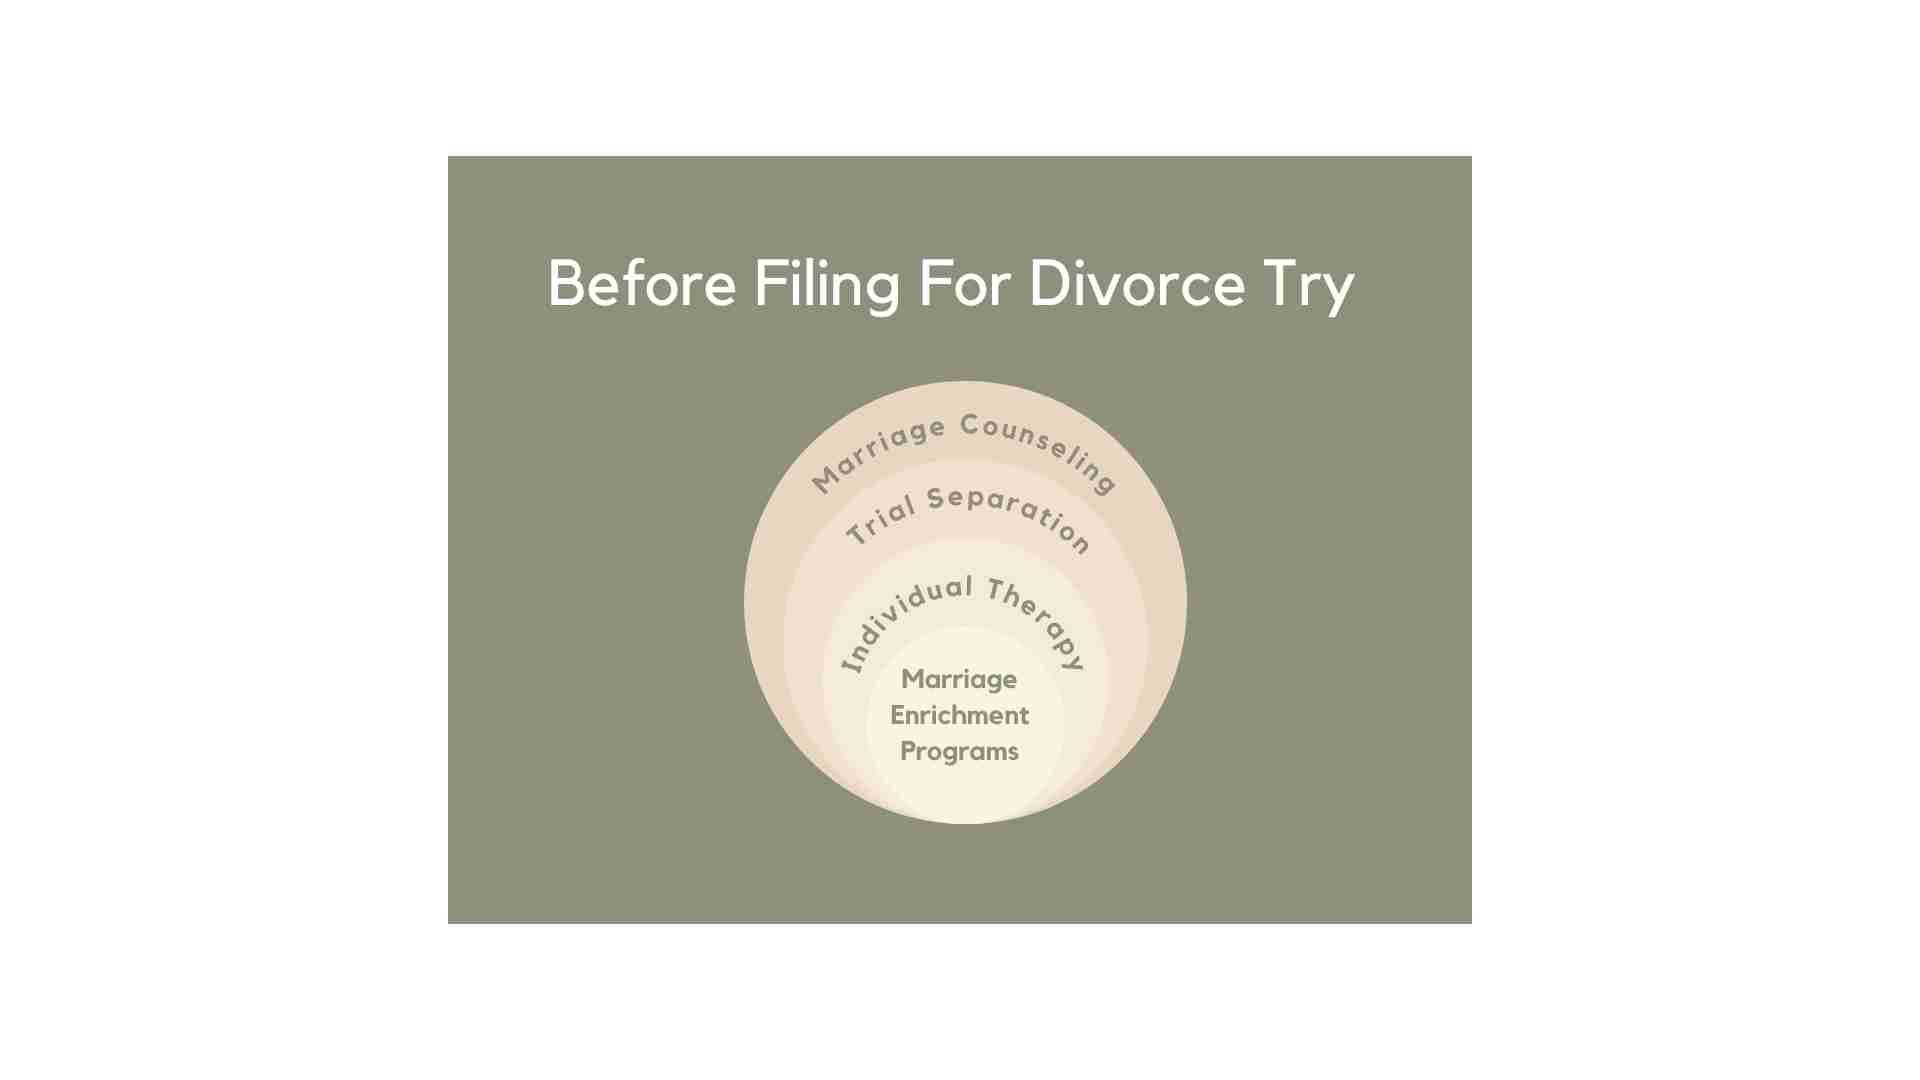 Graphic recommending alternatives before filing for divorce, featuring options like marriage counseling, trial separation, individual therapy, and marriage enrichment programs on a circular diagram.